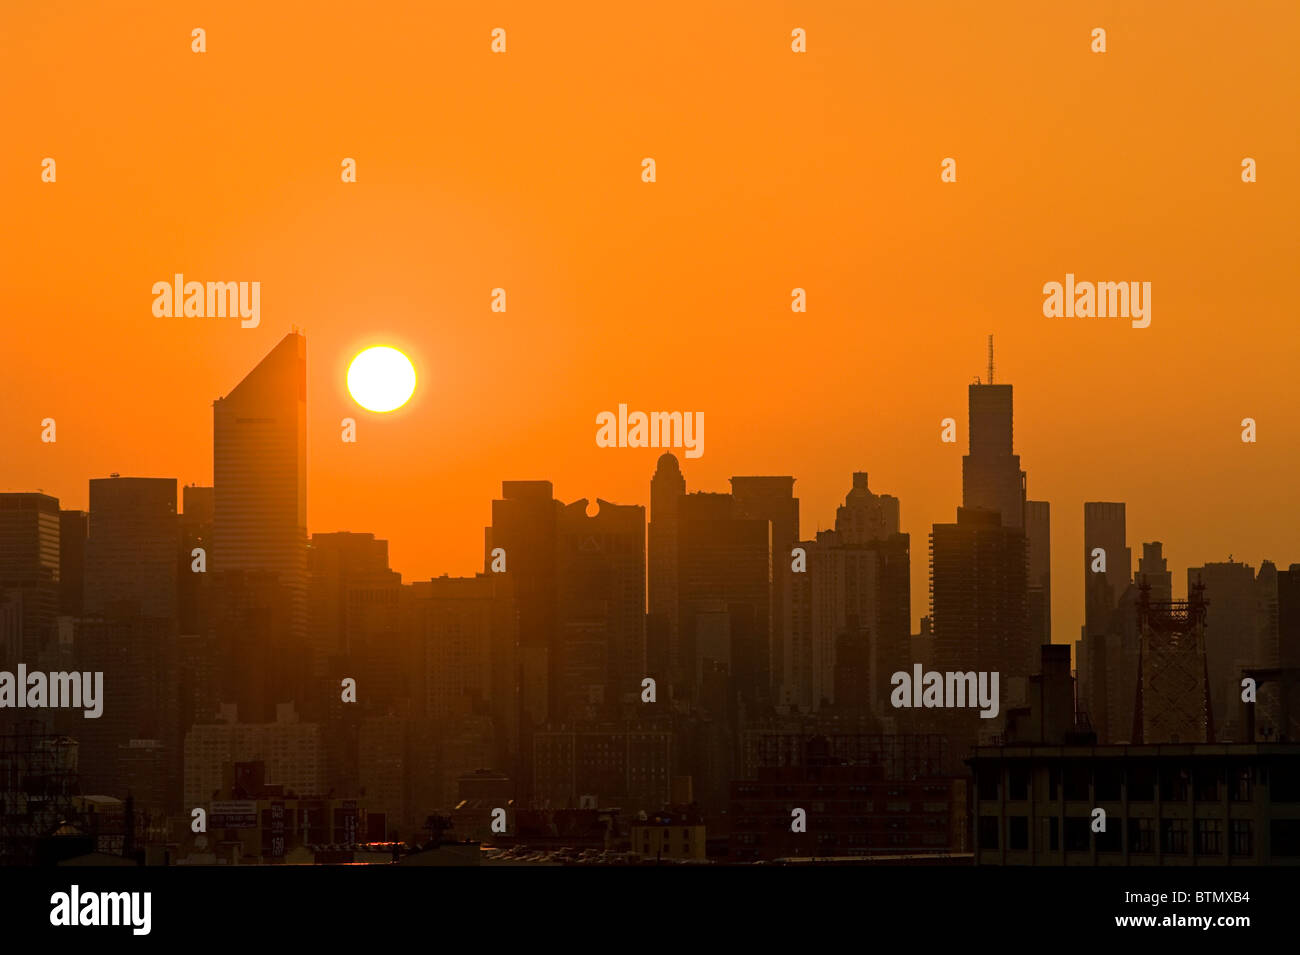 Skyline of Midtown Manhattan with the Citicorp Center, at sunset, New York City. Stock Photo